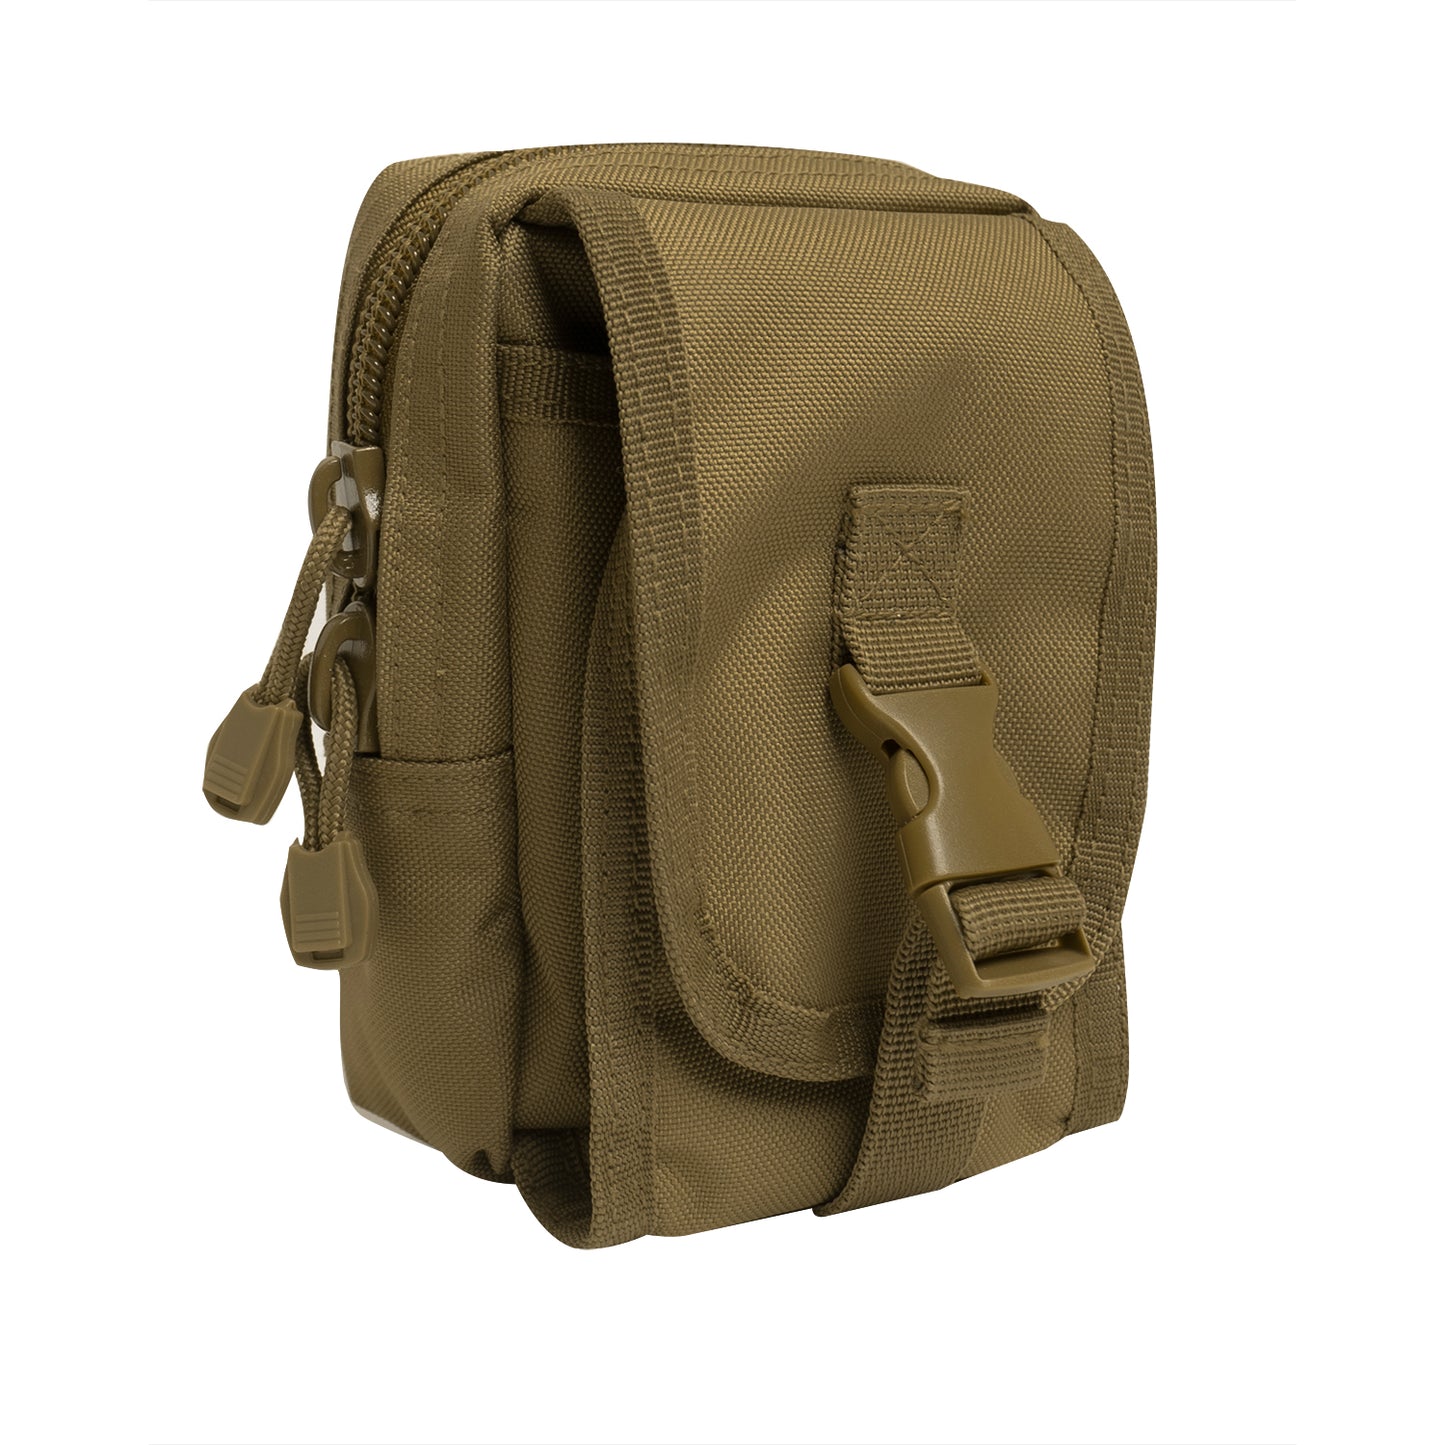 MOLLE Compatible EDC (Everyday Carry) Accessory Pouch